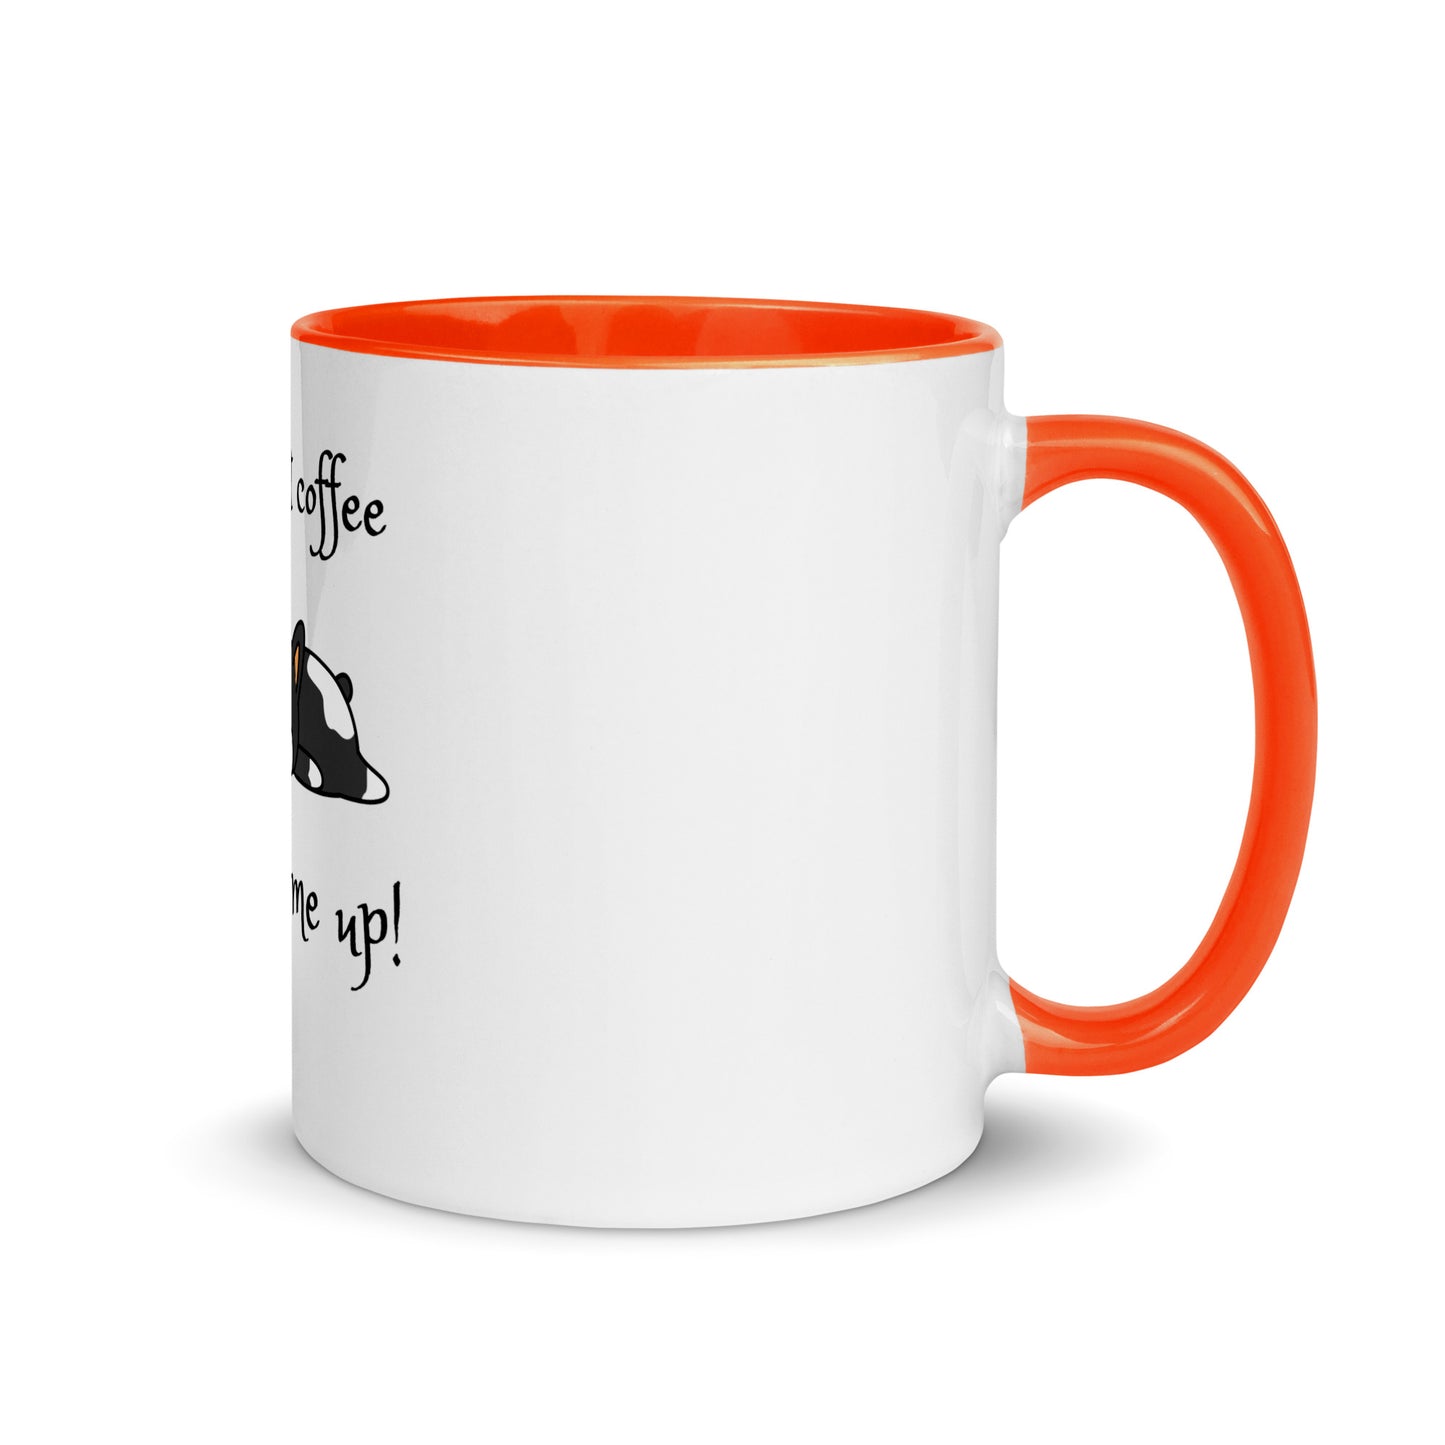 But First Coffee To Wake Me Up Mug with Color Inside